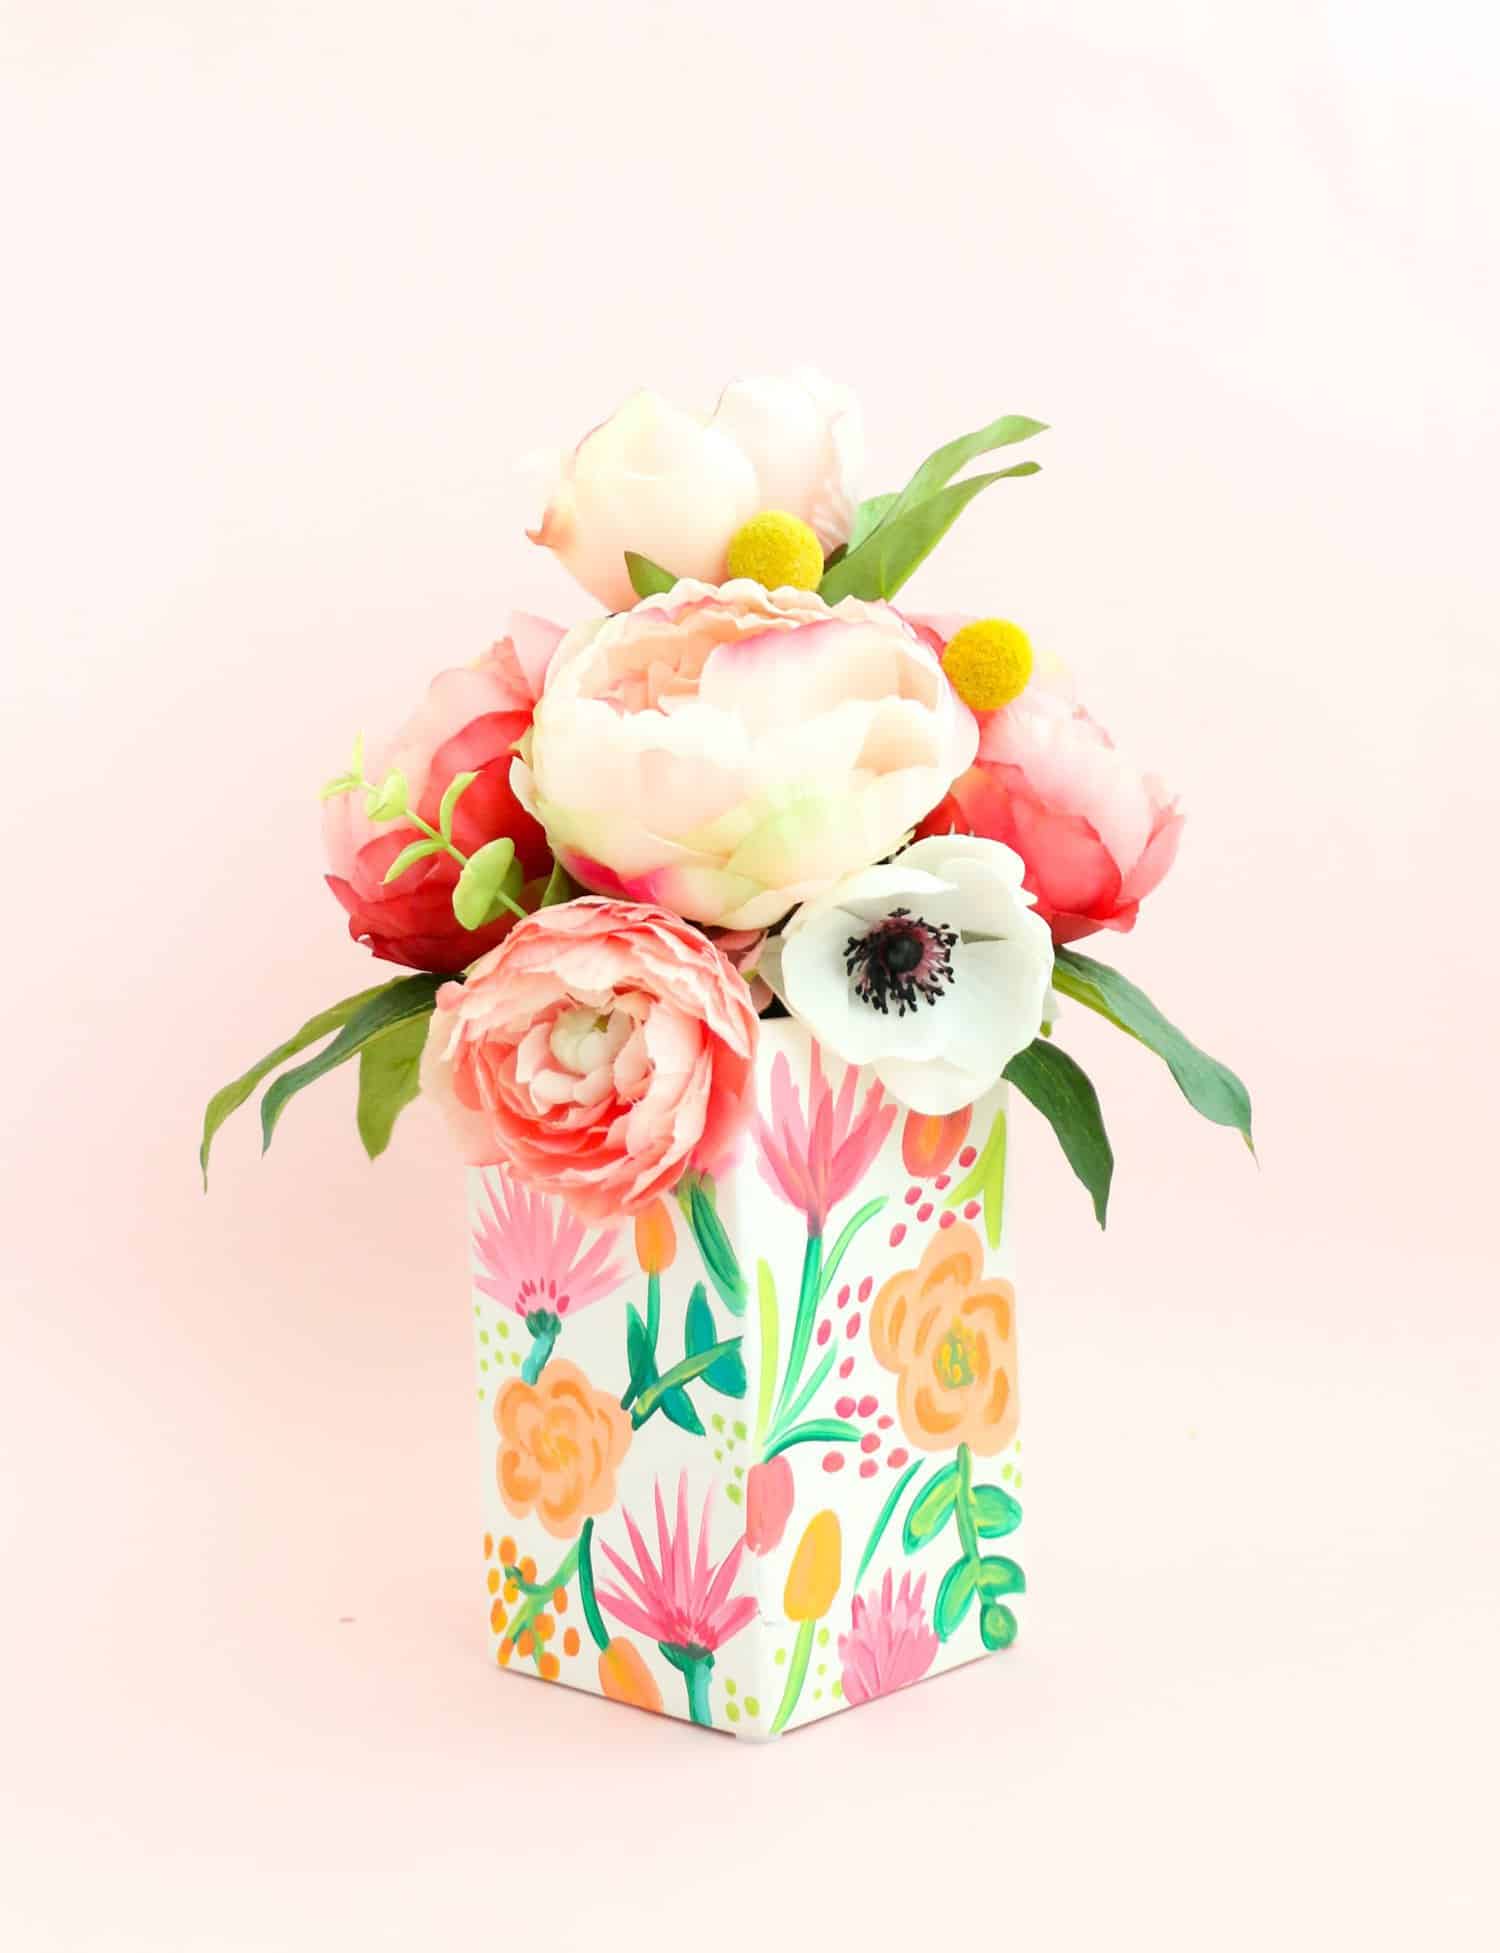 Paint-Your-Own-Pattern-on-Pattern-Floral-Vase-click-through-for-tutorial-2